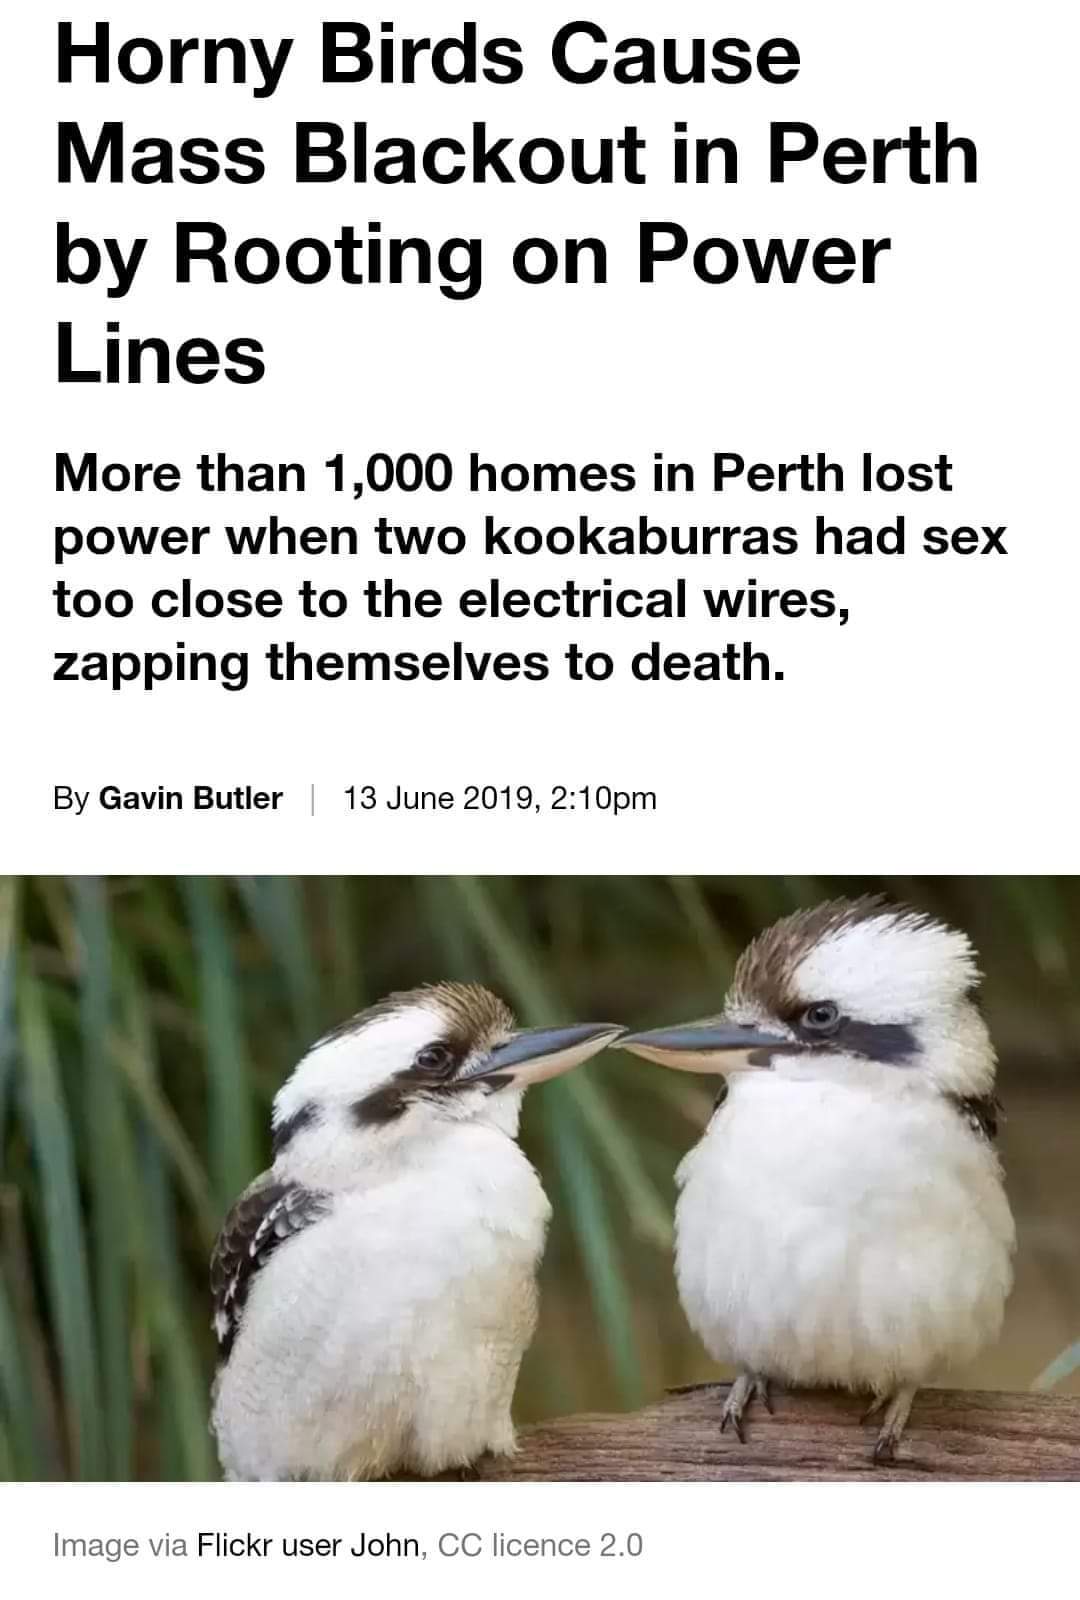 beak - Horny Birds Cause Mass Blackout in Perth by Rooting on Power Lines More than 1,000 homes in Perth lost power when two kookaburras had sex too close to the electrical wires, zapping themselves to death. By Gavin Butler | , pm Image via Flickr user J